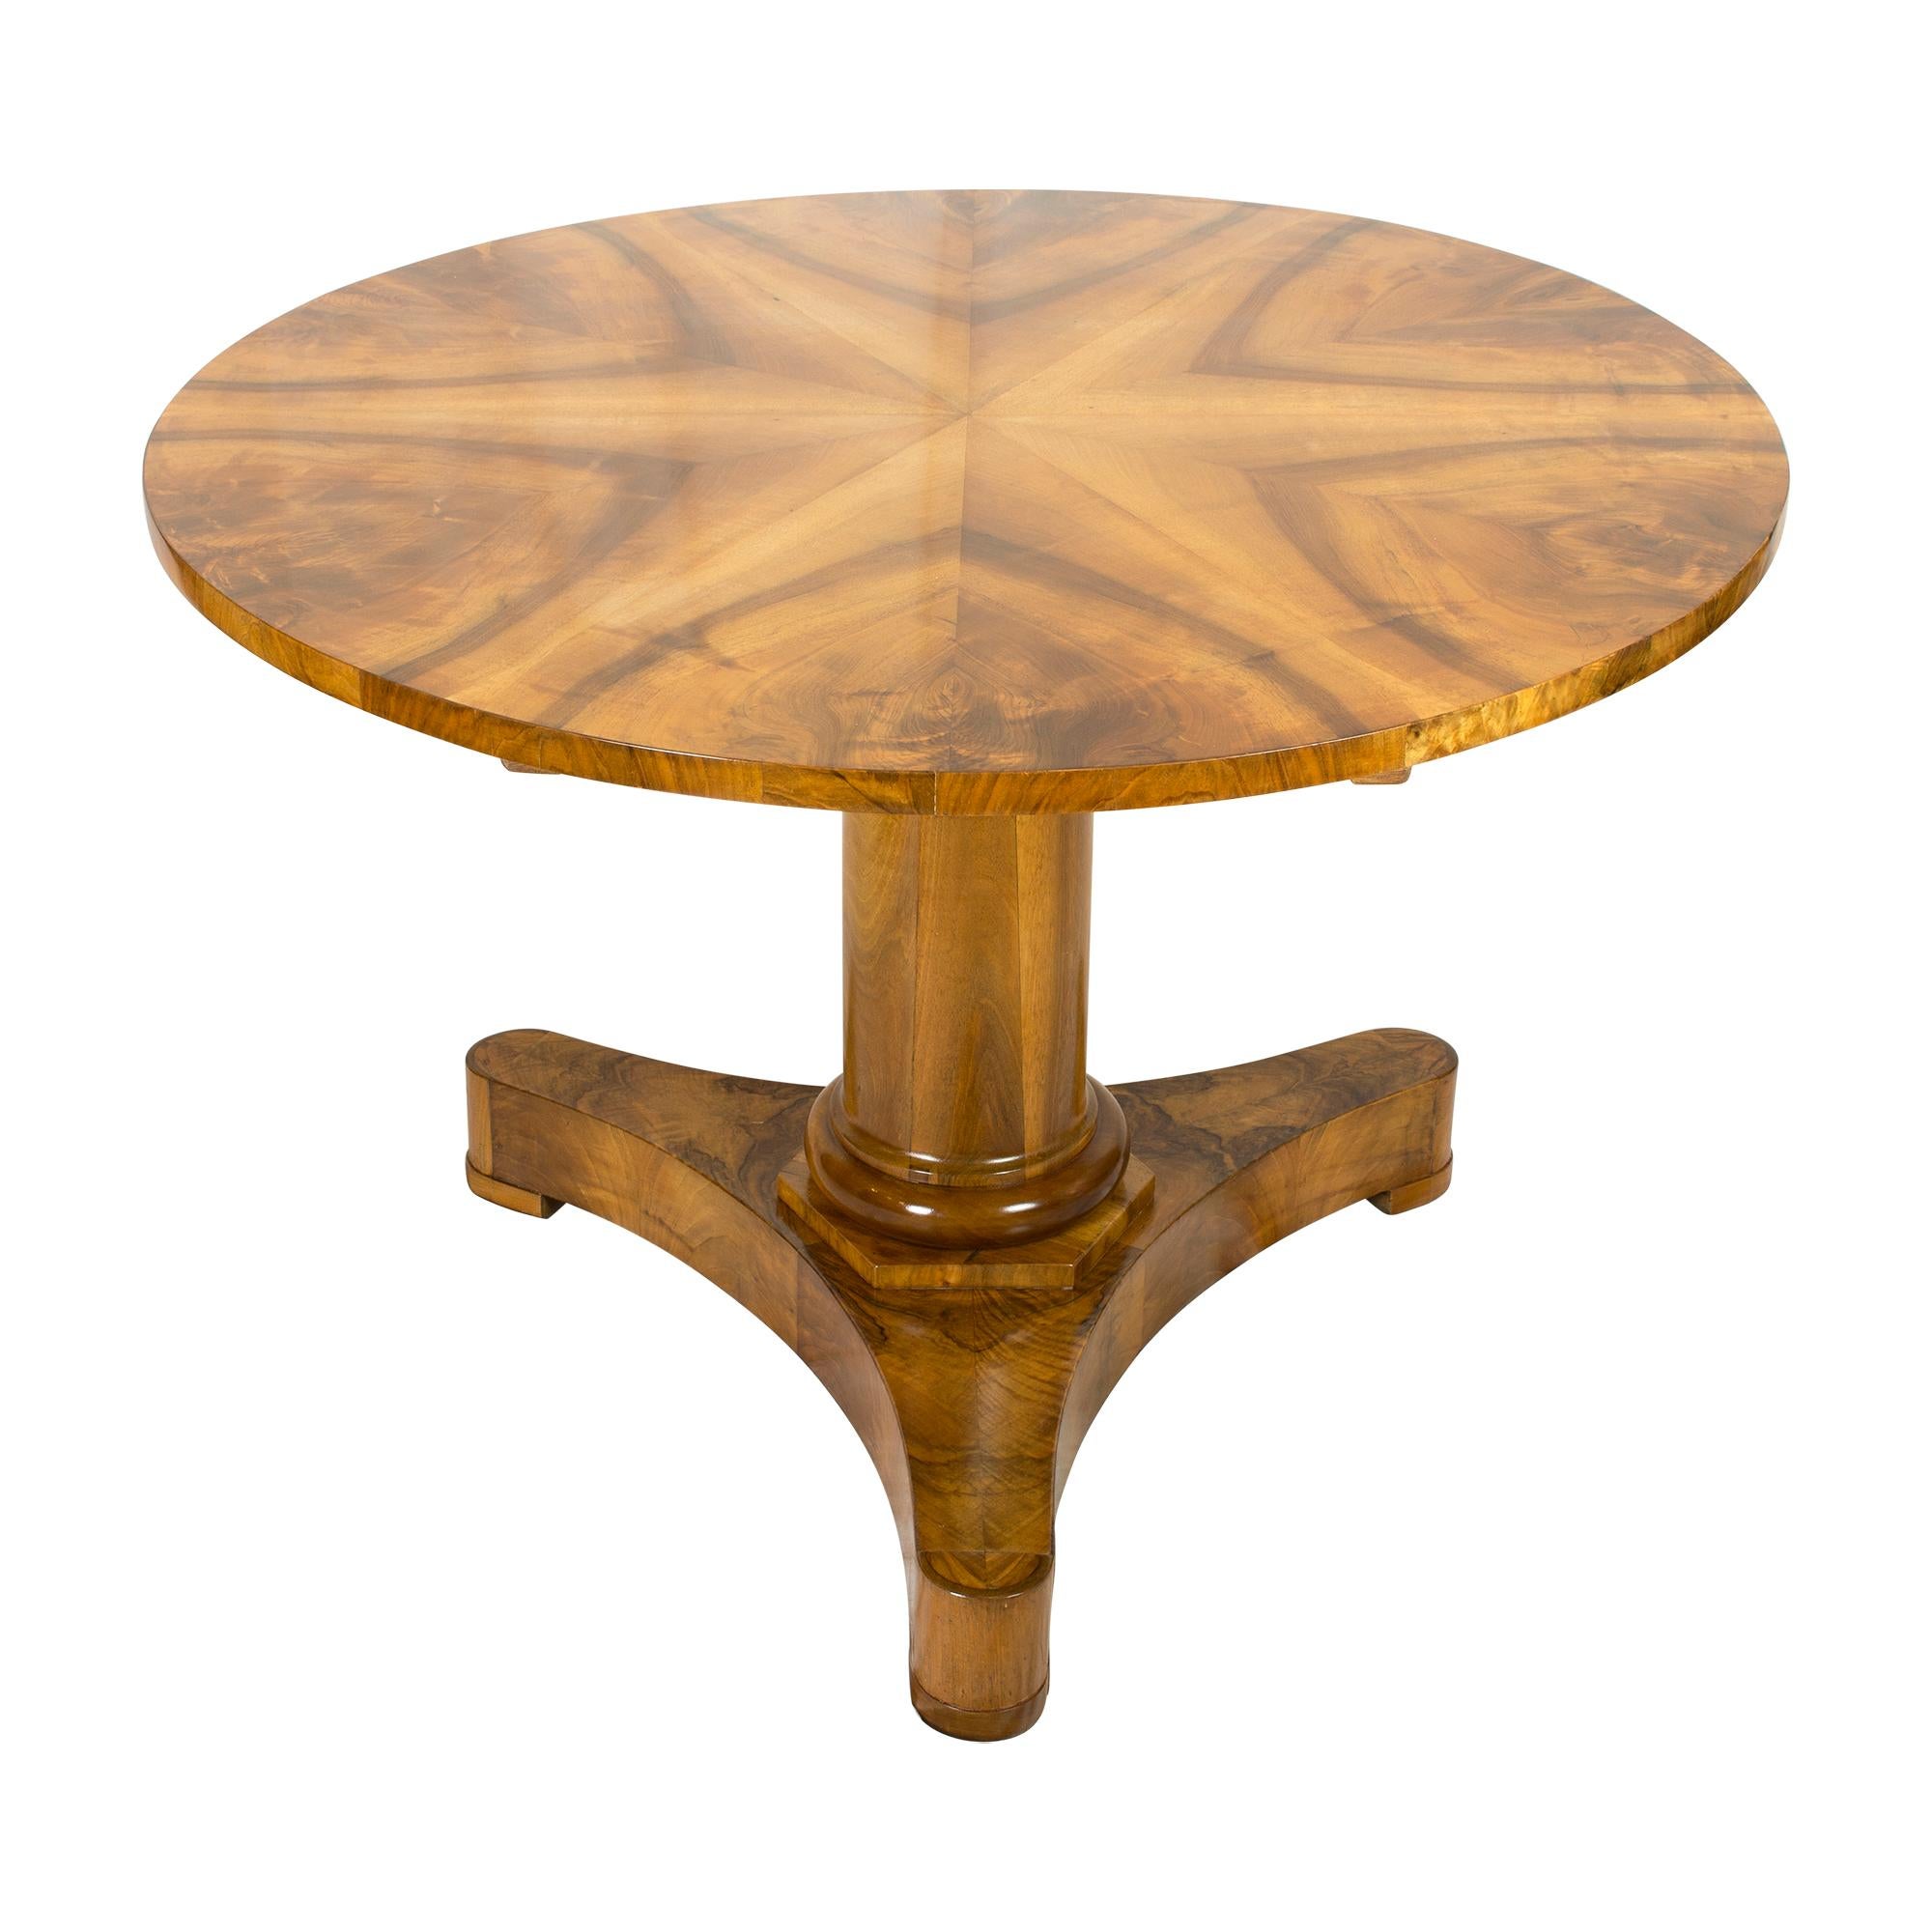 Introducing the Biedermeier round table, made with Walnut veneer on a solid spruce wood base. This table features a simple yet elegant design and is perfect for intimate dinner parties or business meetings. The round shape provides ample space for